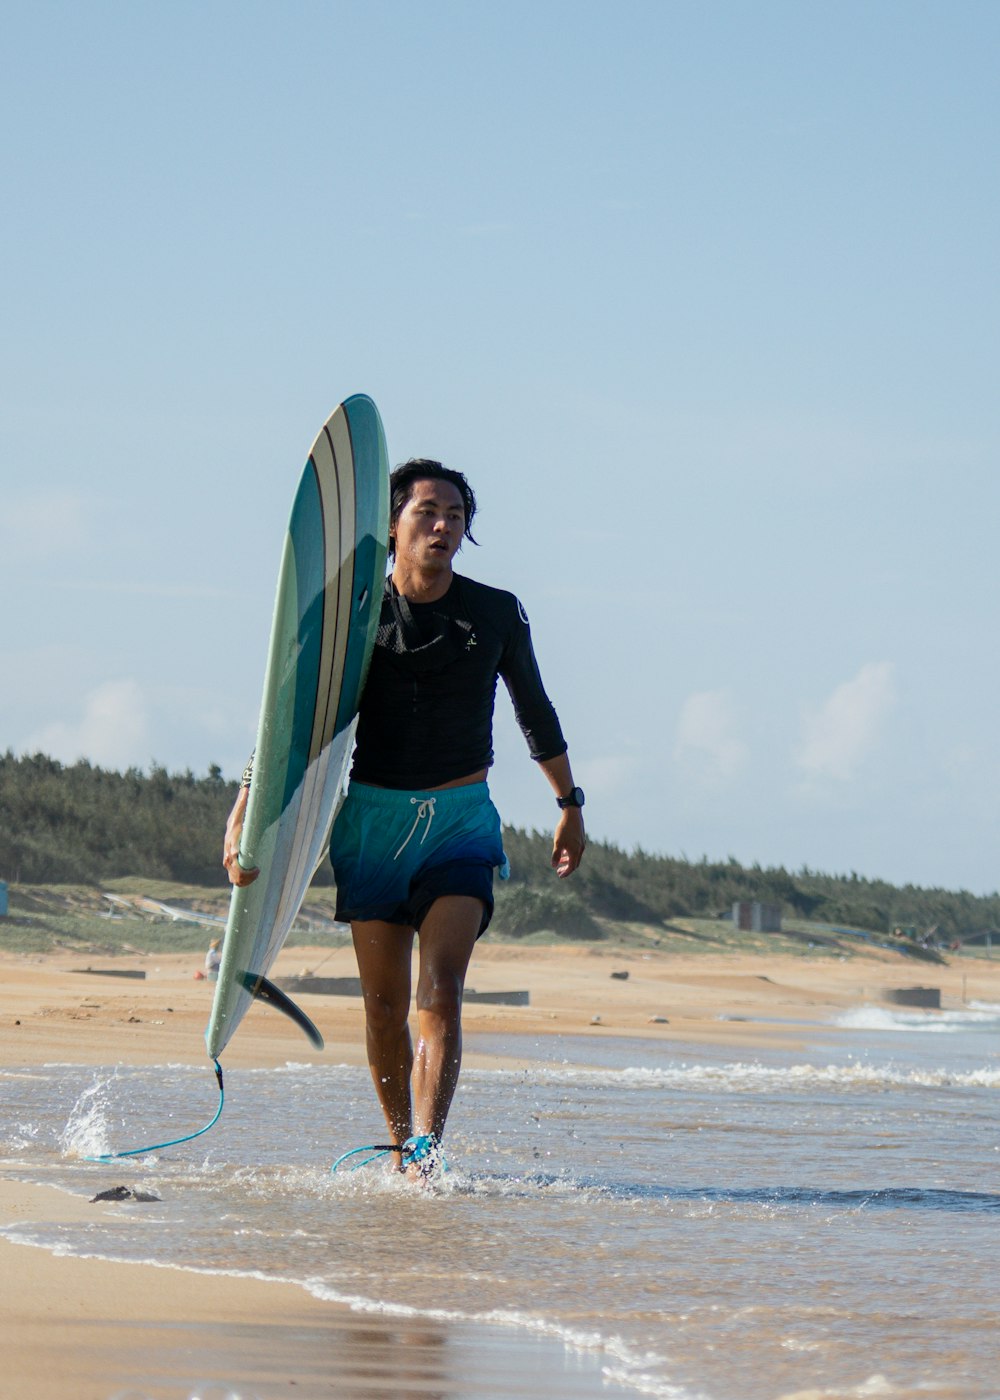 a person holding a surfboard on the beach